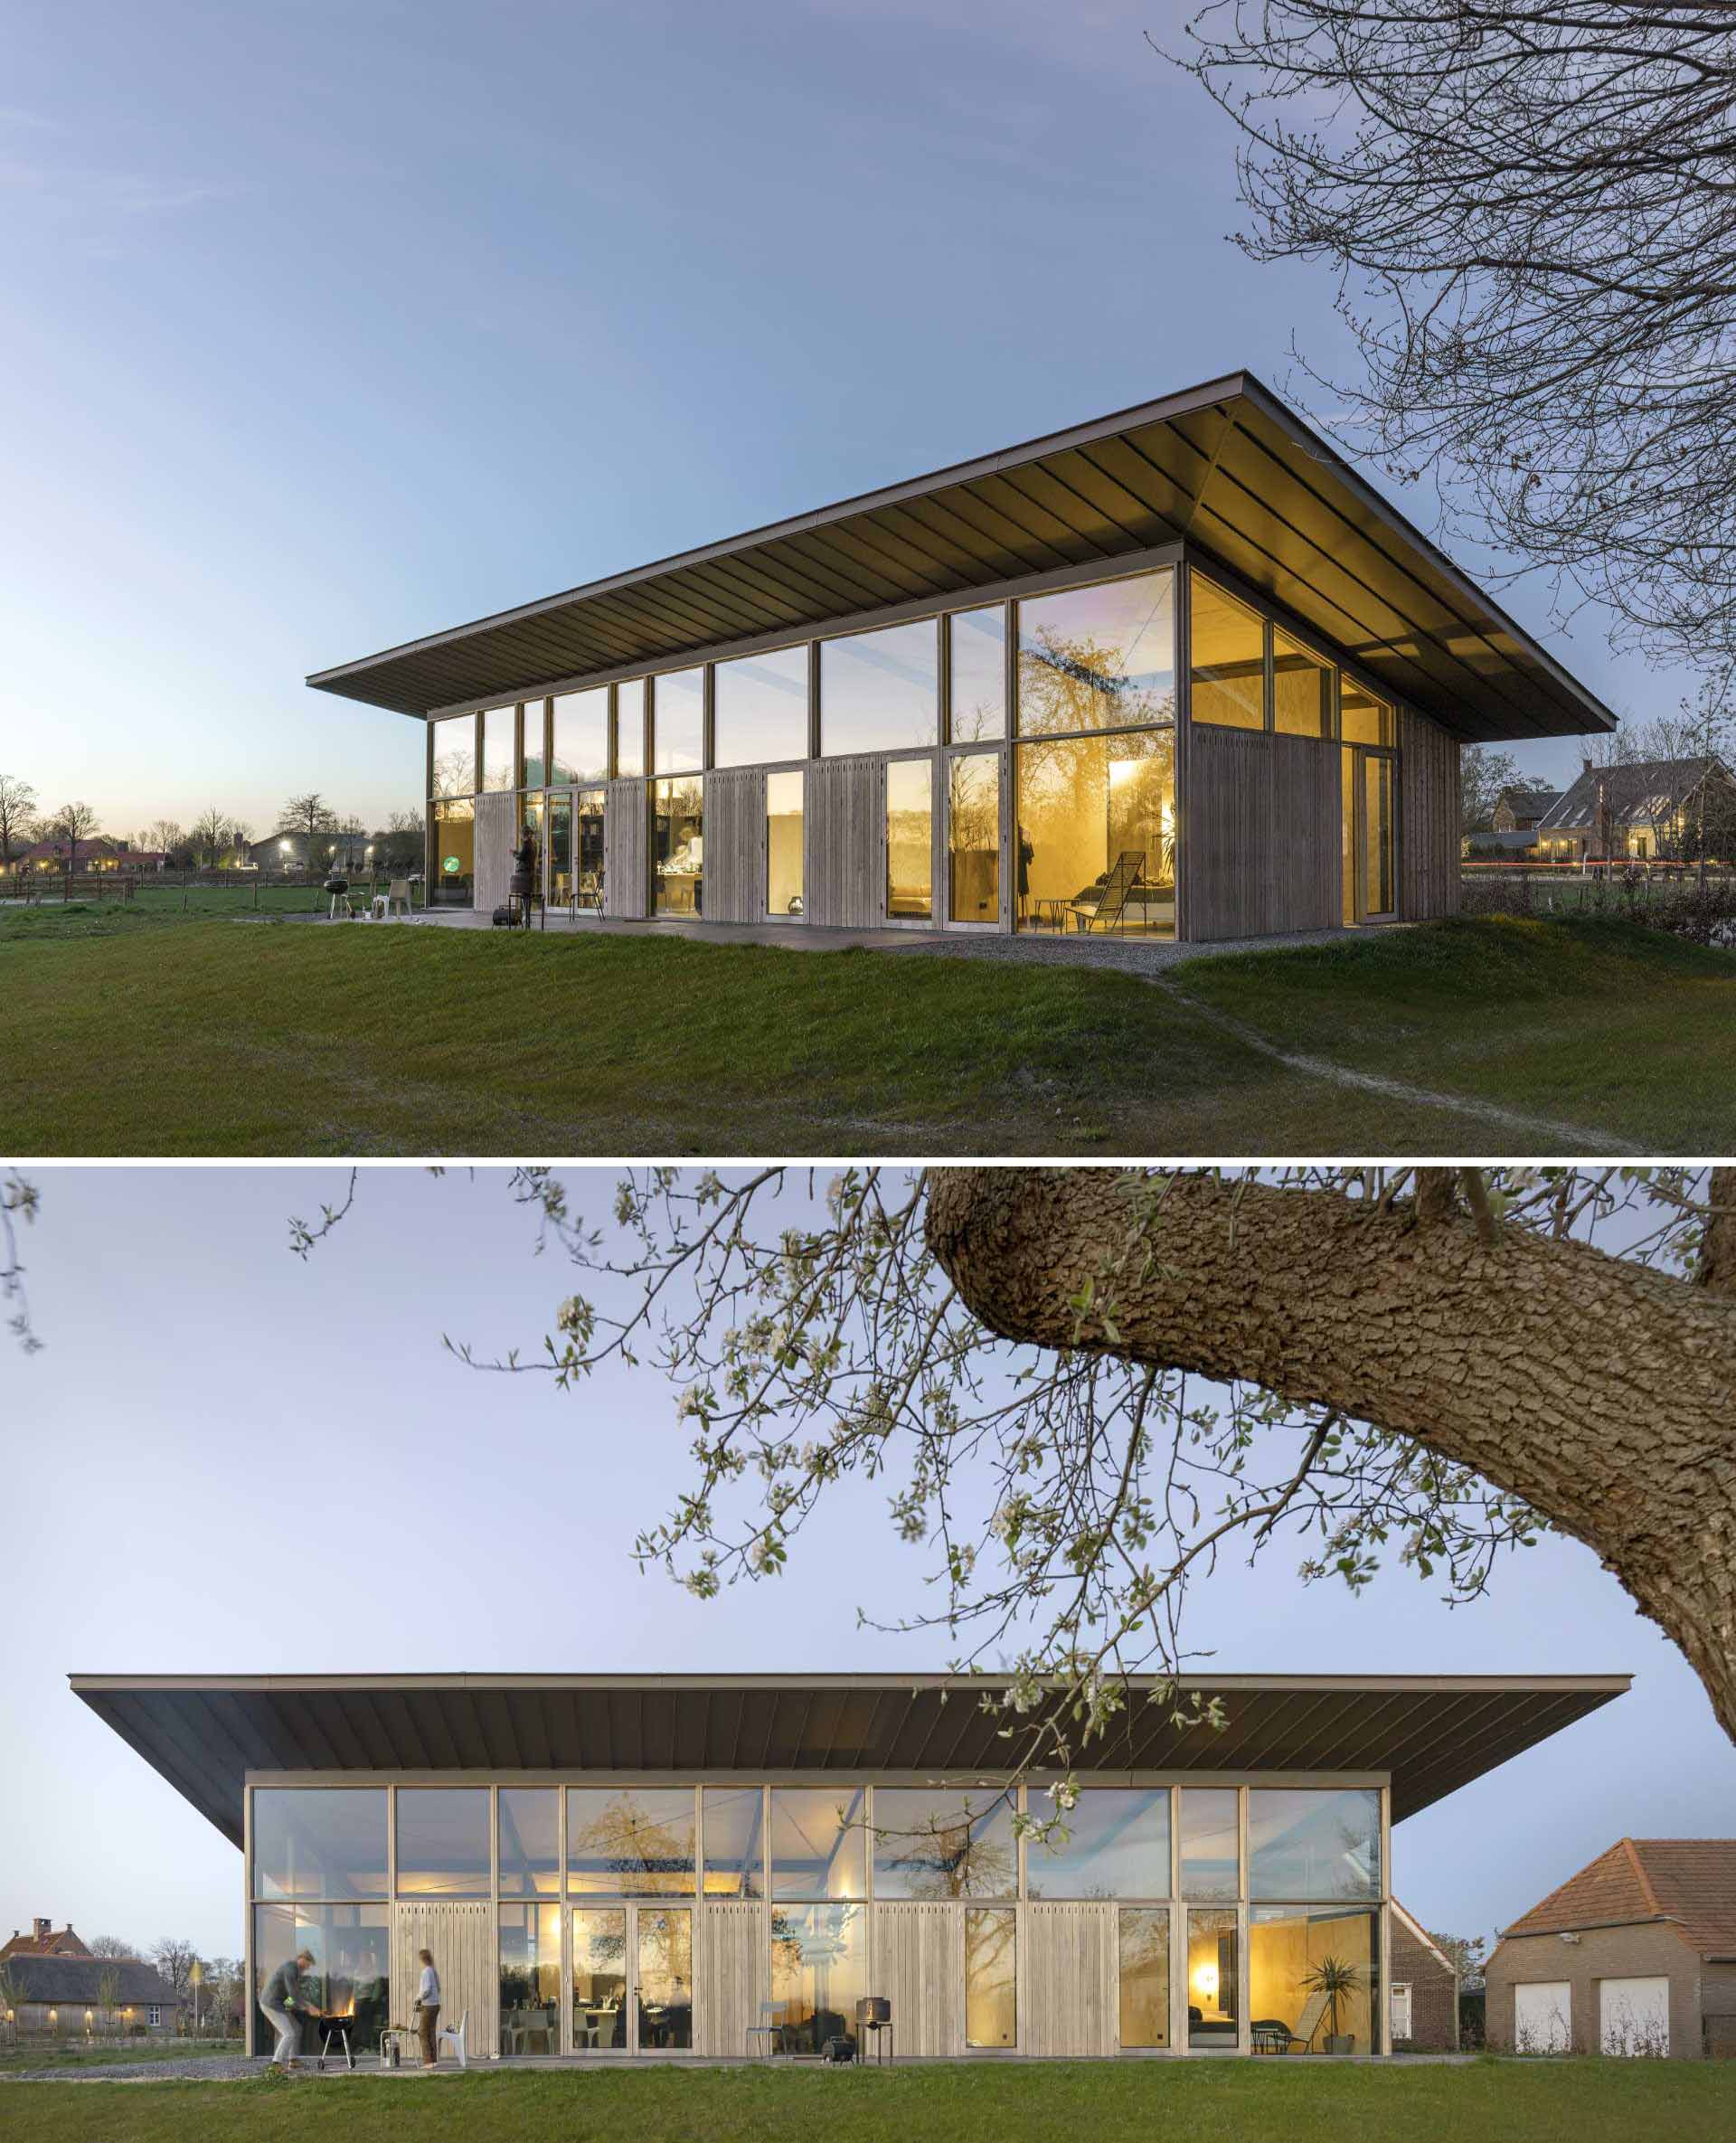 This modern home, named Villa V, measures 65 feet (20m) wide and just 26 feet (8m) deep, and has a view of the river.